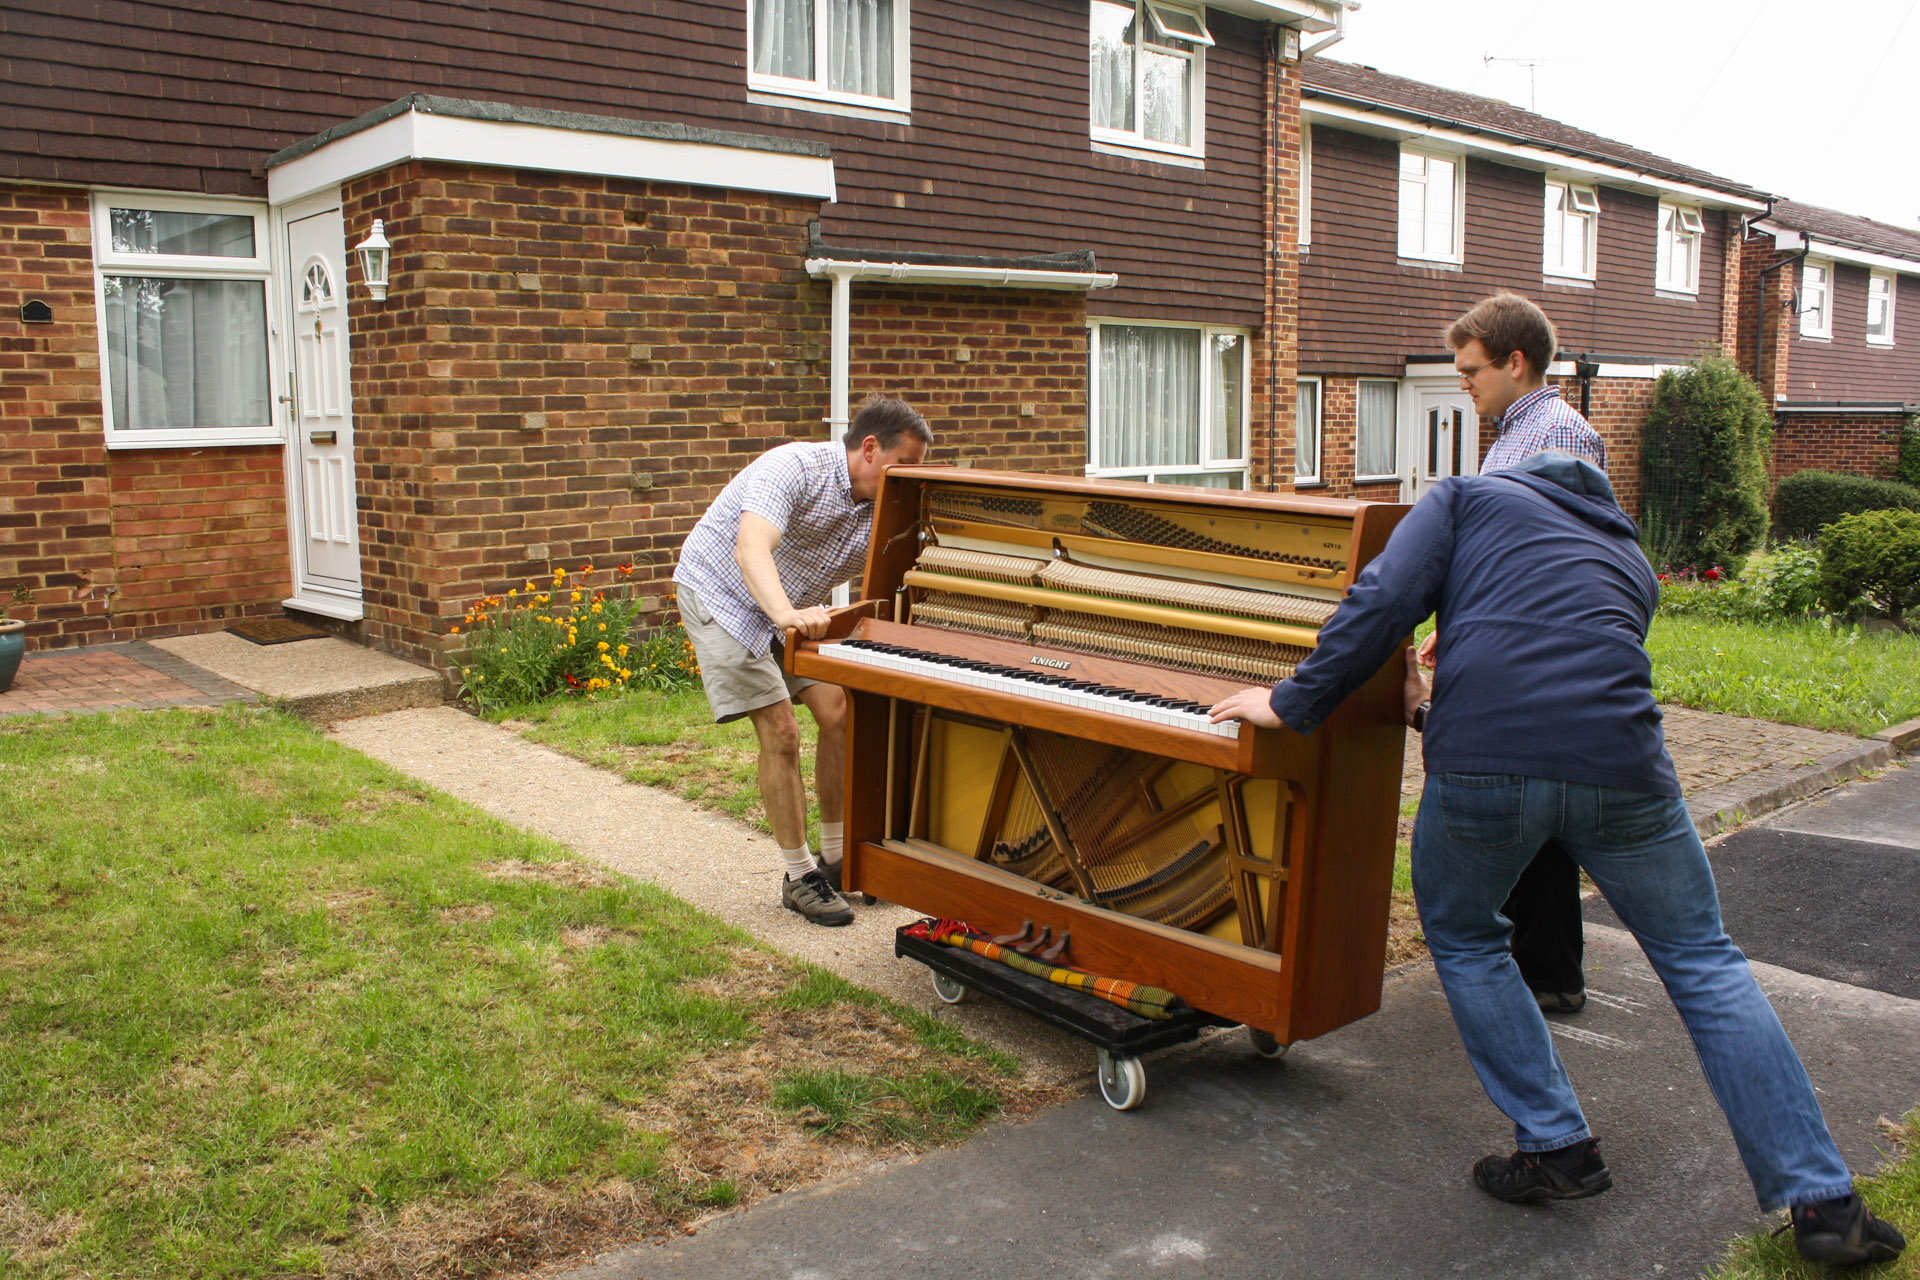 Manouevering the piano over his threshold, it took just two minutes to wheel the piano along the footpaths of Matthew's estate.